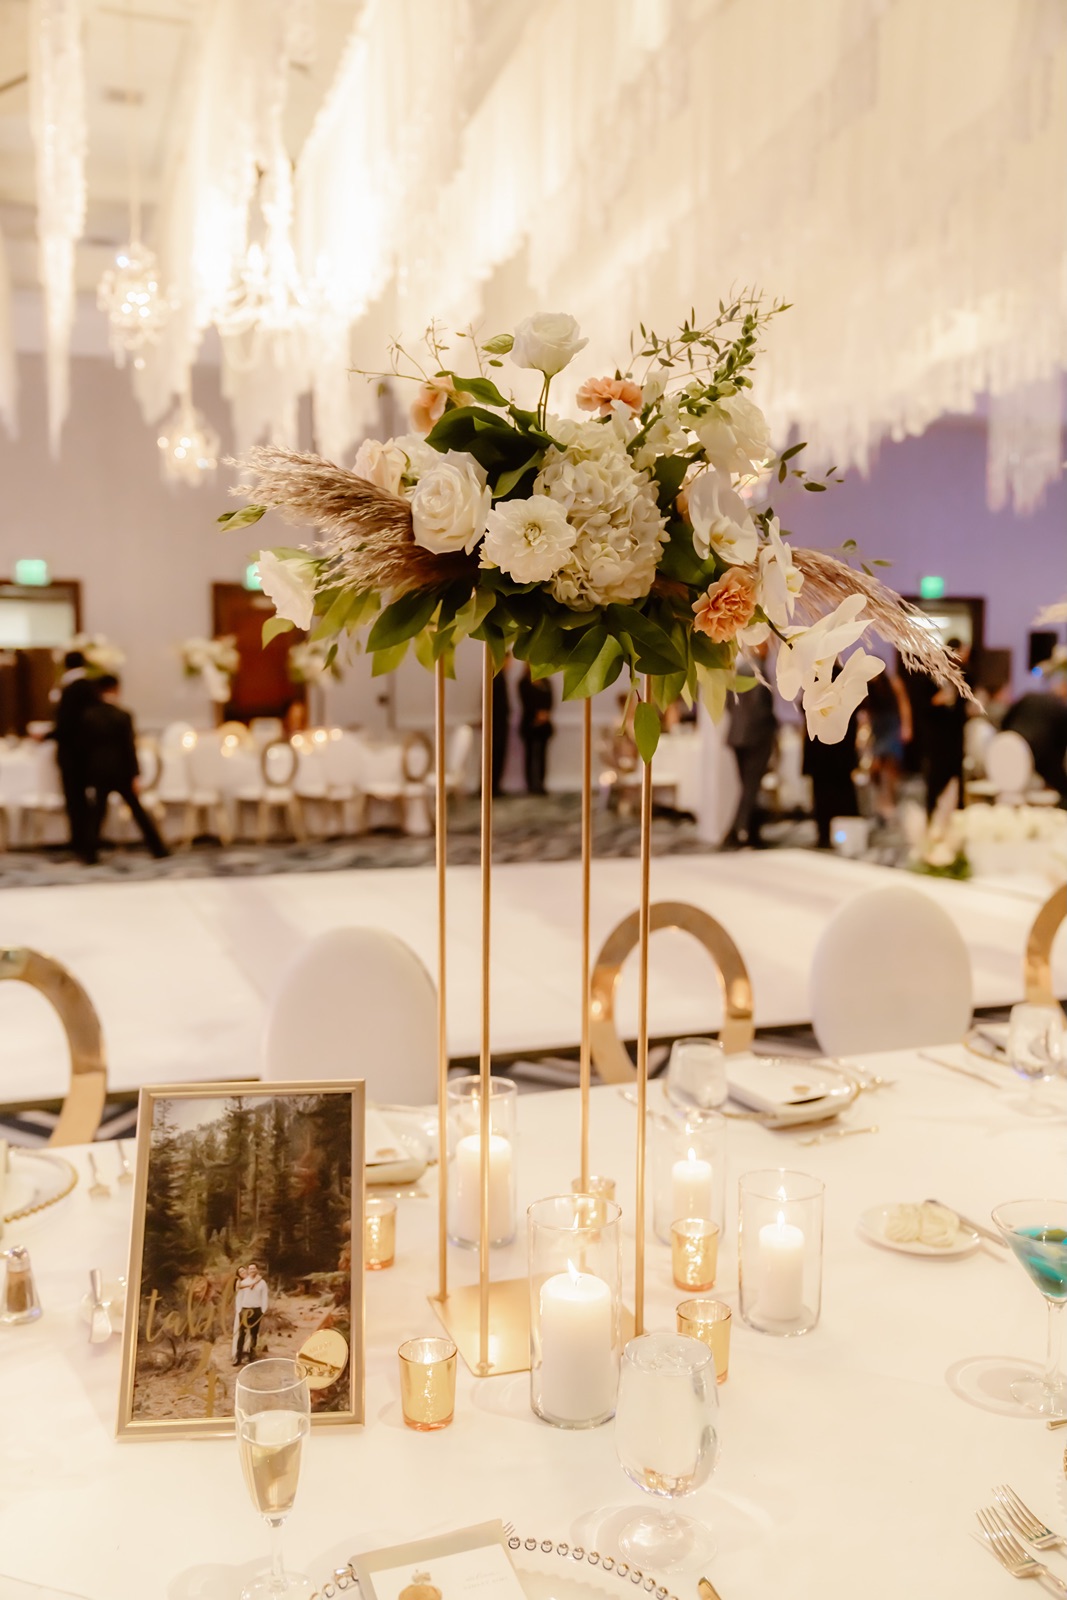 Elevated wedding centerpieces at the Everline Resort and Spa wedding reception